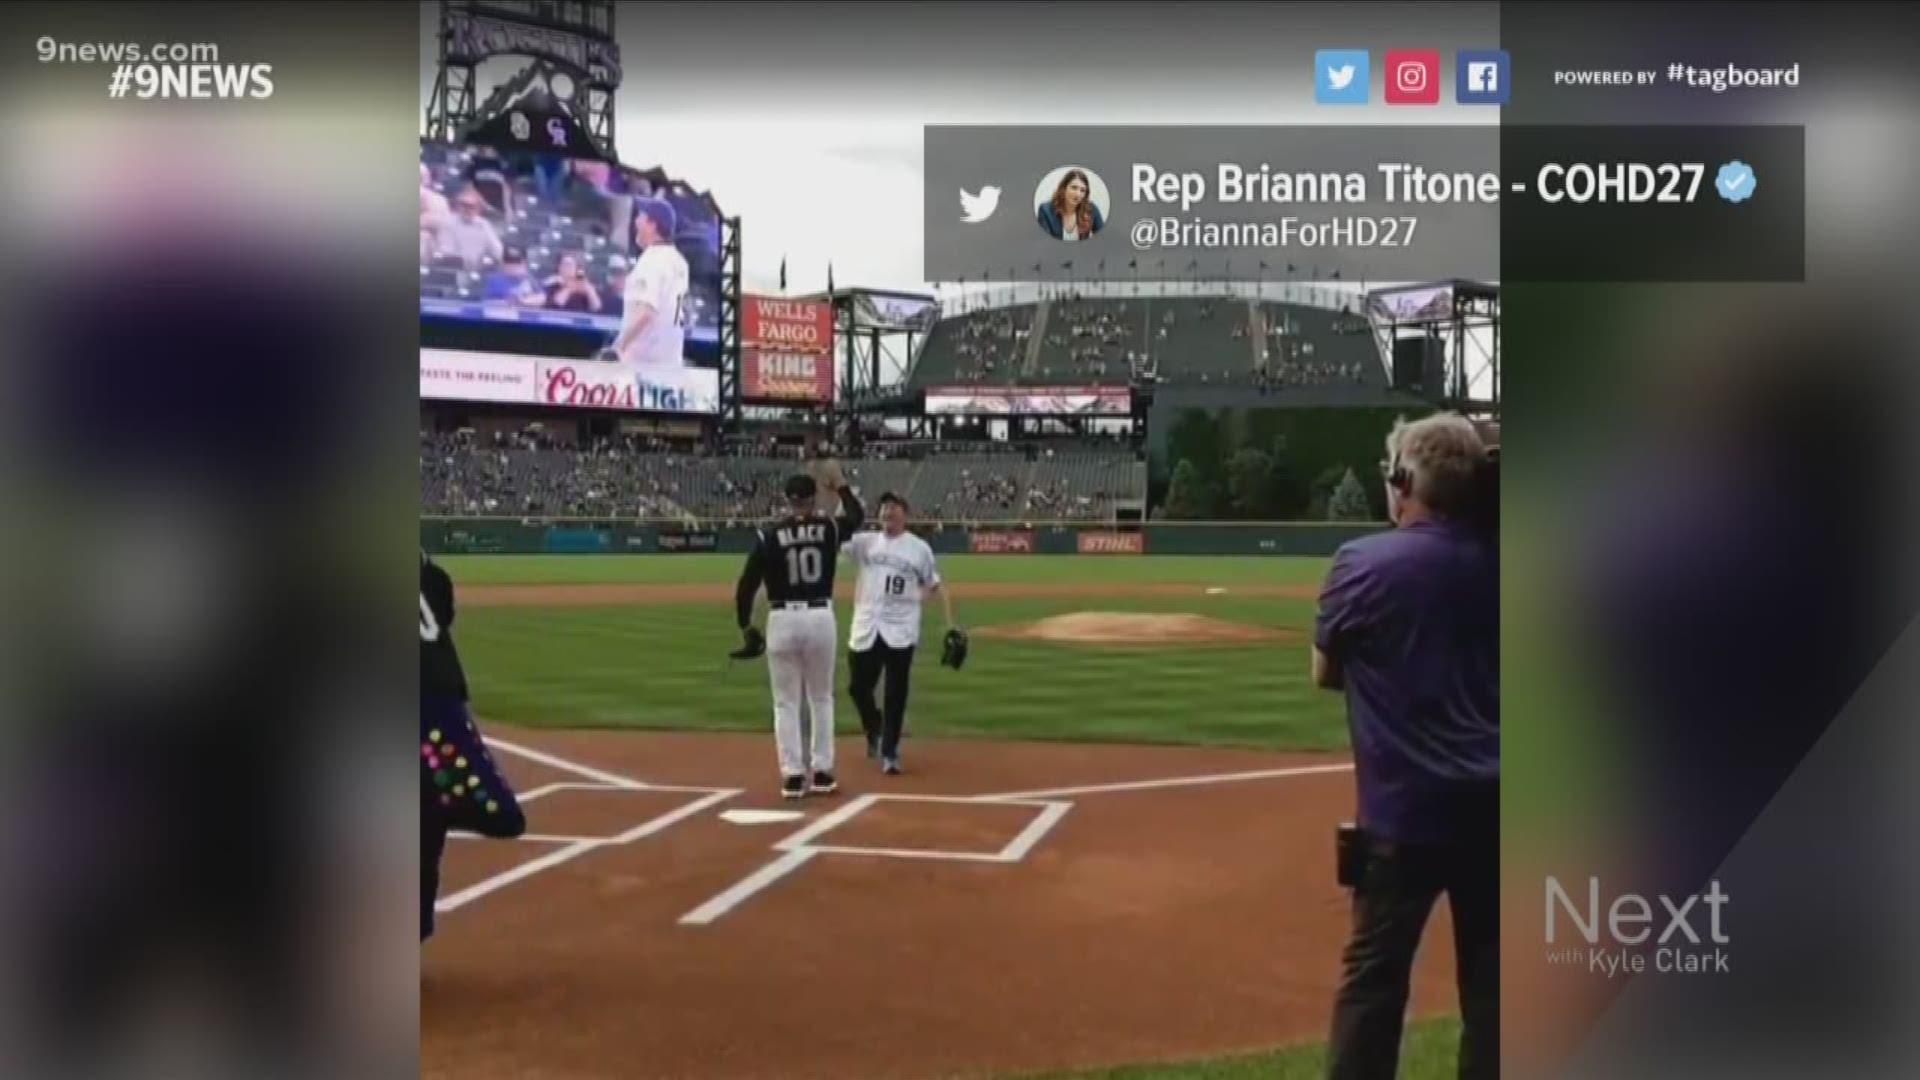 Colorado Gov. Jared Polis, a known baseball fan, has got a throwing arm we never knew about. Look at the first pitch he threw out at the Rockies game on June 15.